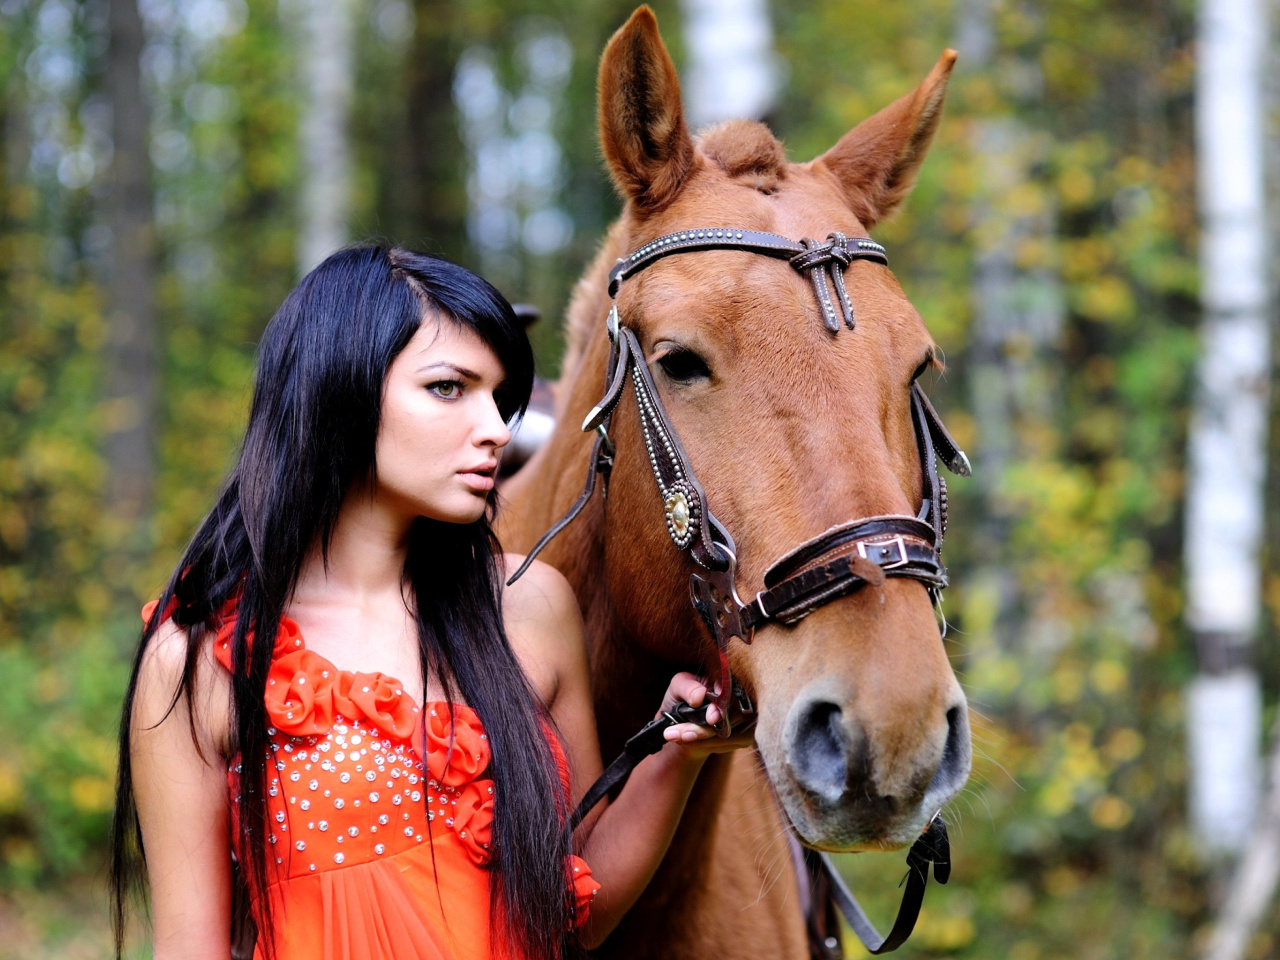 Girl with Horse wallpaper 1280x960